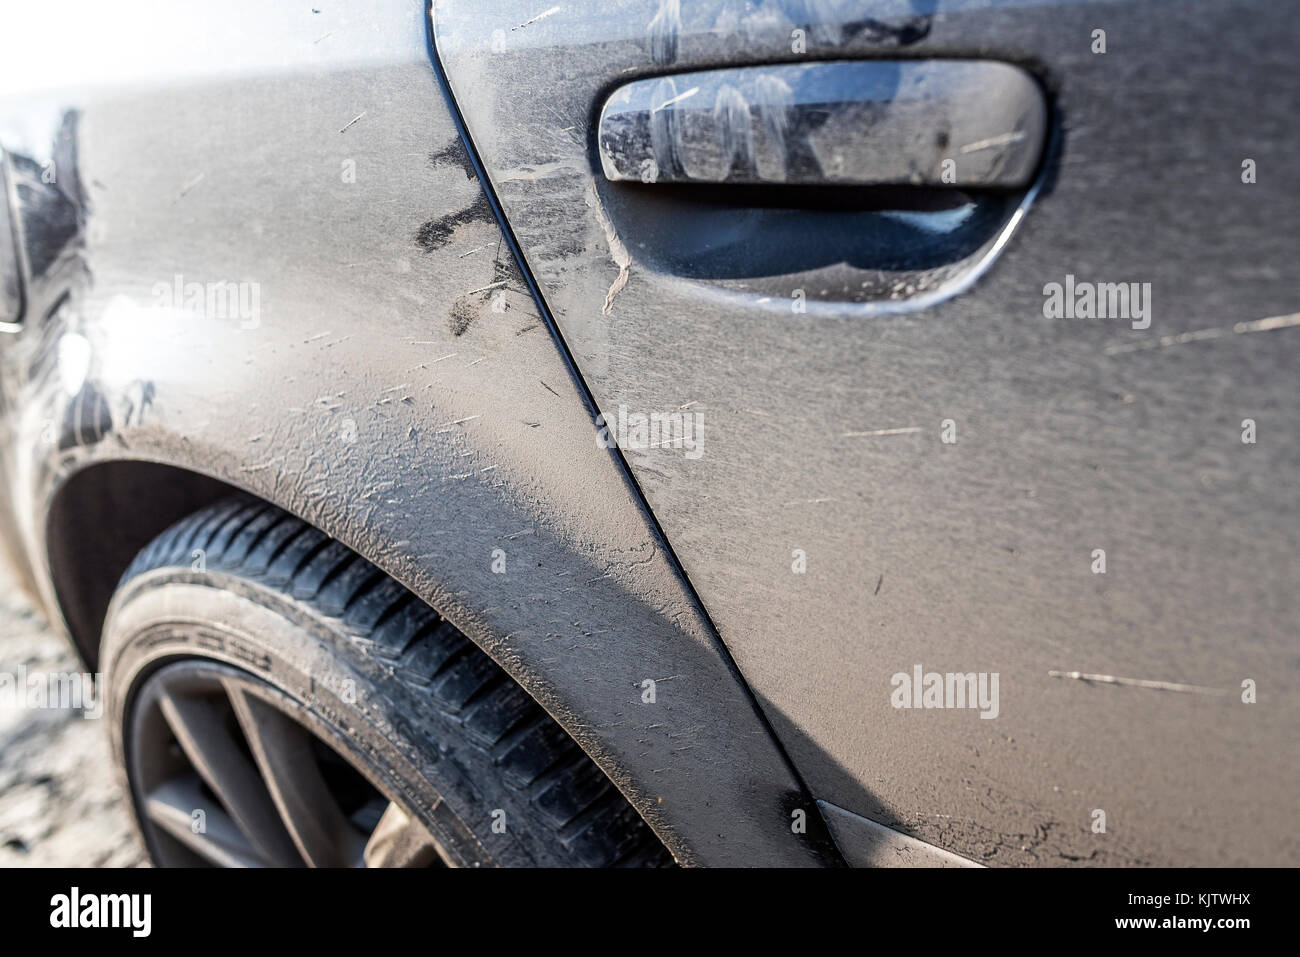 Part of a dirty stained car close up. Stock Photo